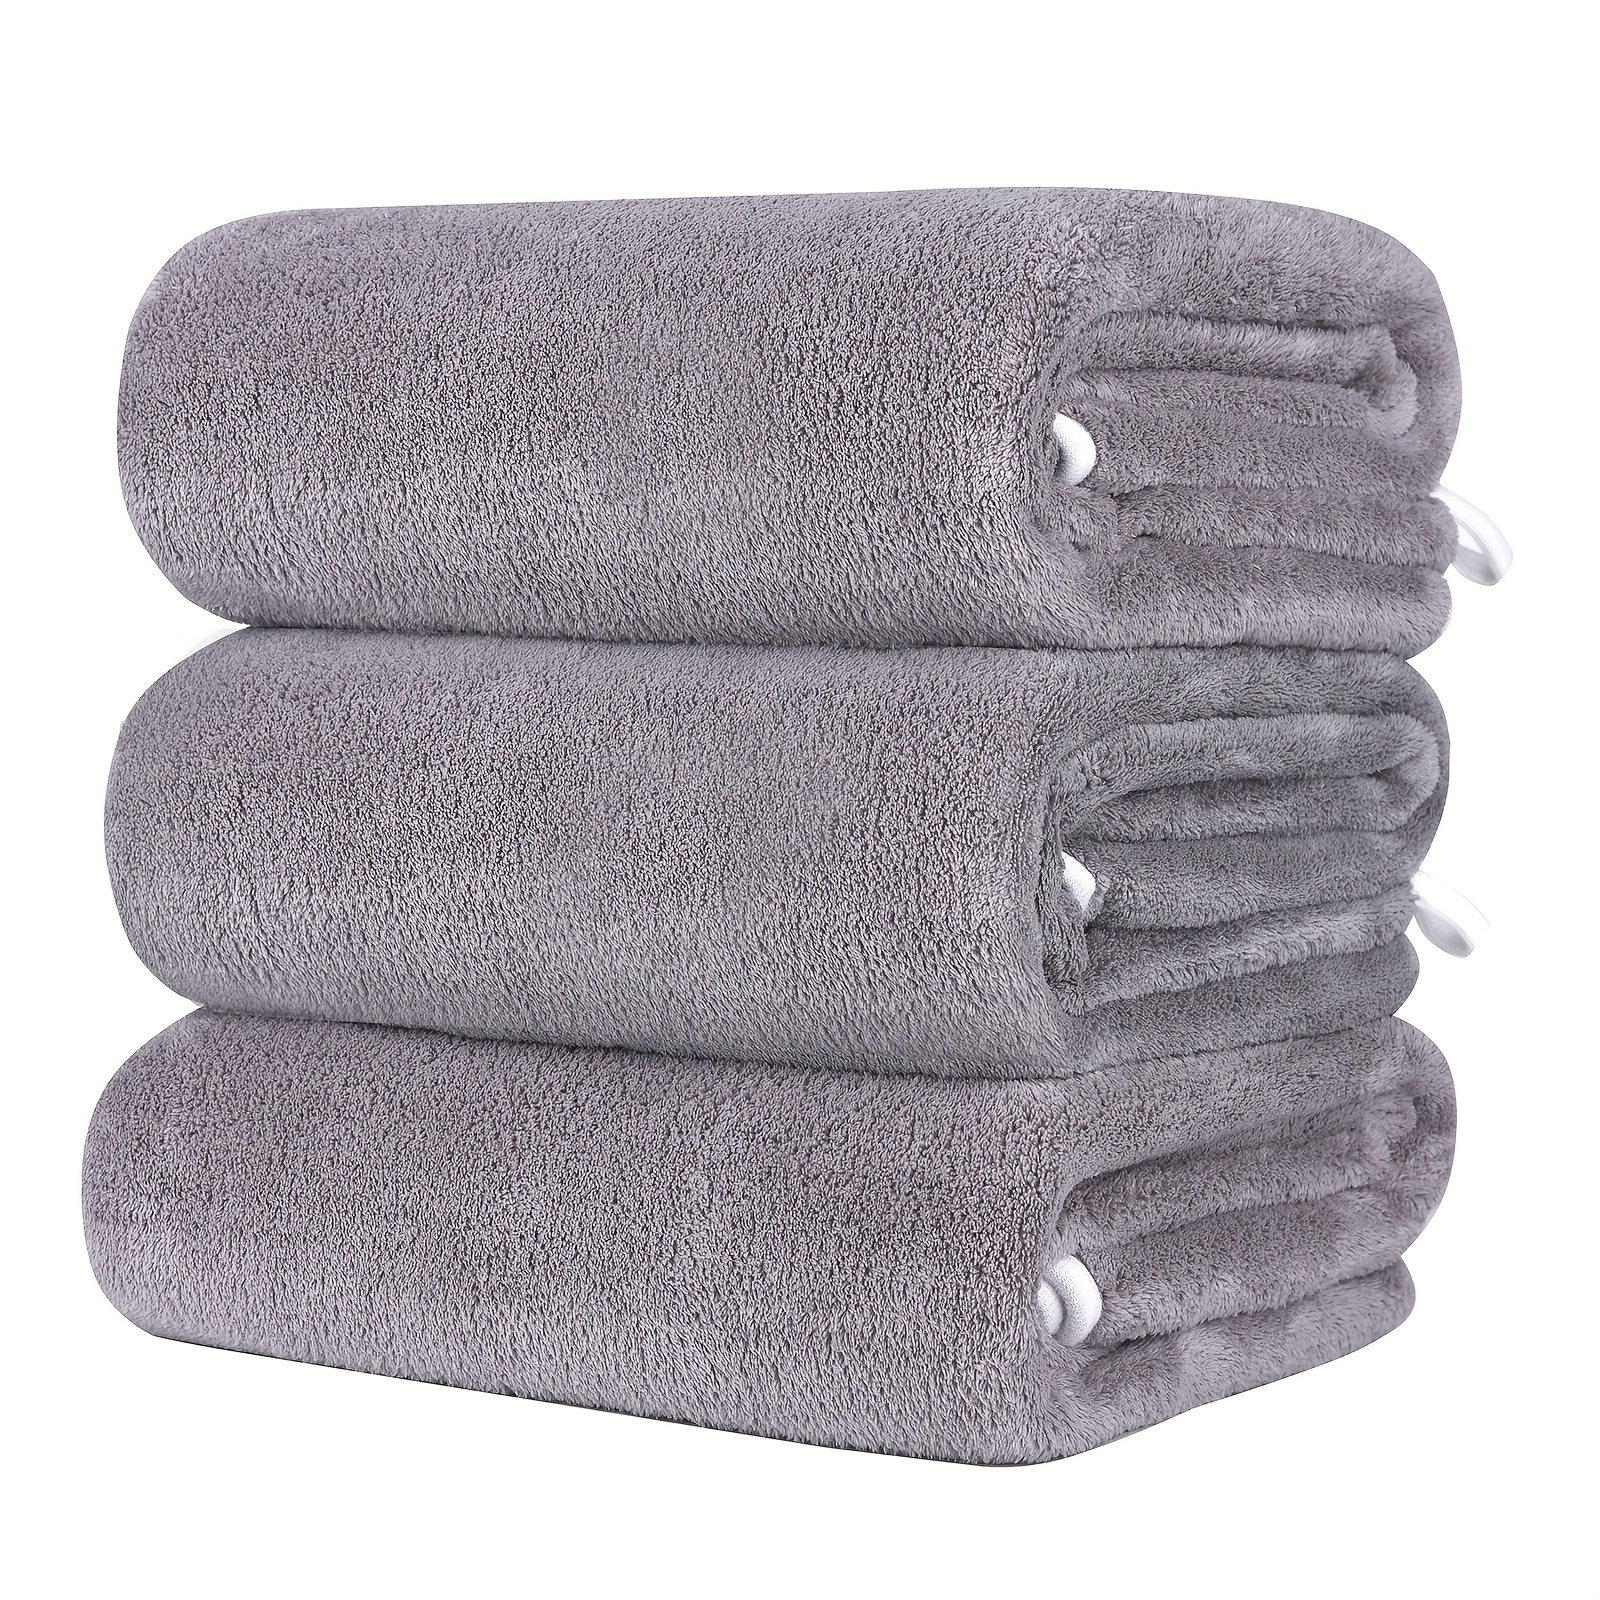 2/4 Pcs Bamboo Charcoal Coral Velvet Bath Towel For Adult Soft Absorbent  Quick-Drying Towel Home Bathroom Microfiber Towel Sets - AliExpress